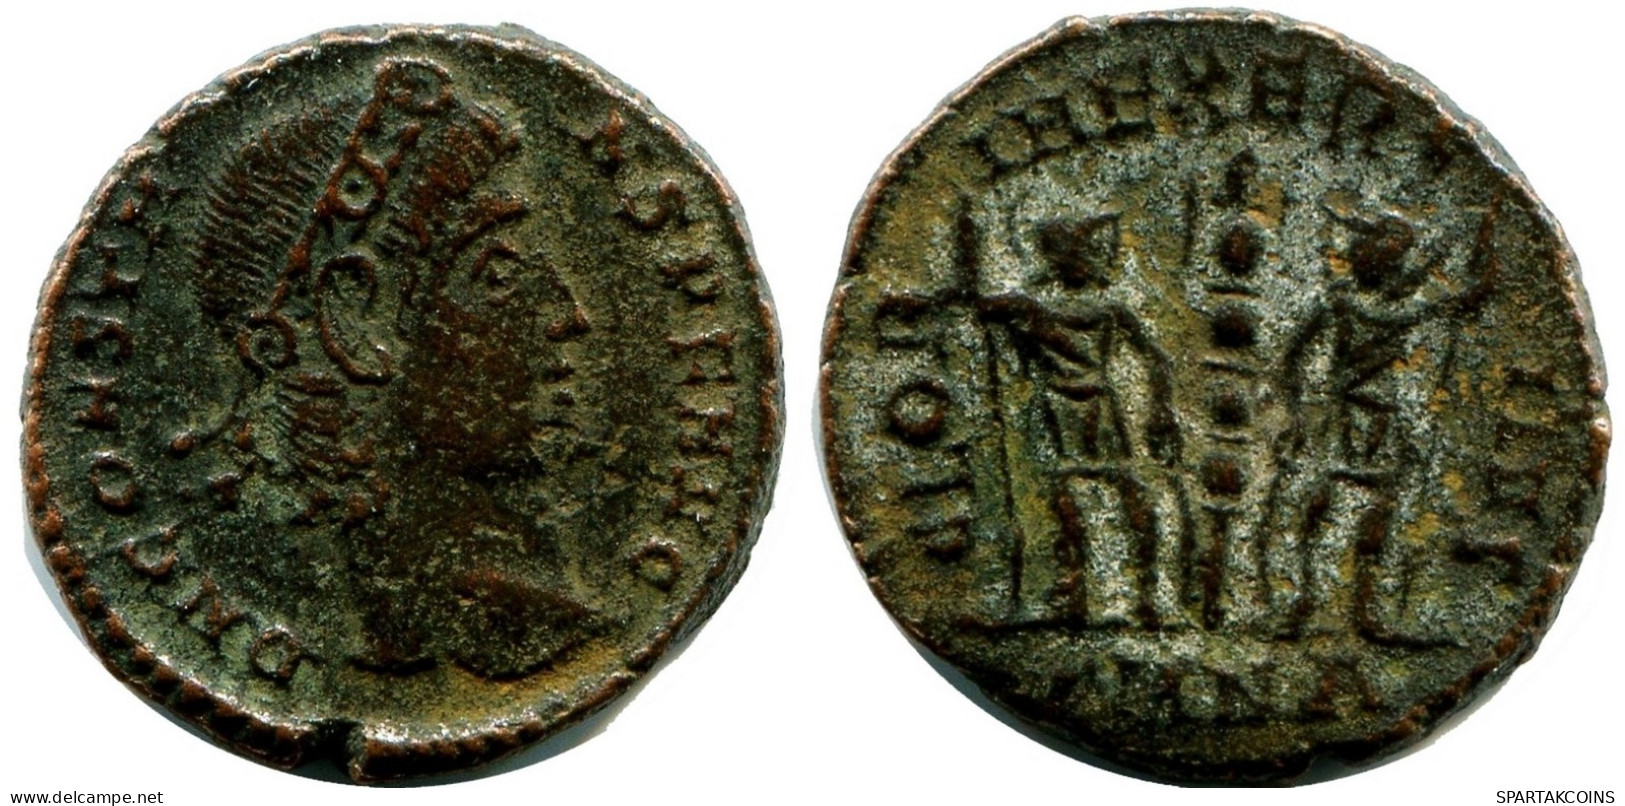 CONSTANS MINTED IN NICOMEDIA FOUND IN IHNASYAH HOARD EGYPT #ANC11791.14.F.A - El Imperio Christiano (307 / 363)